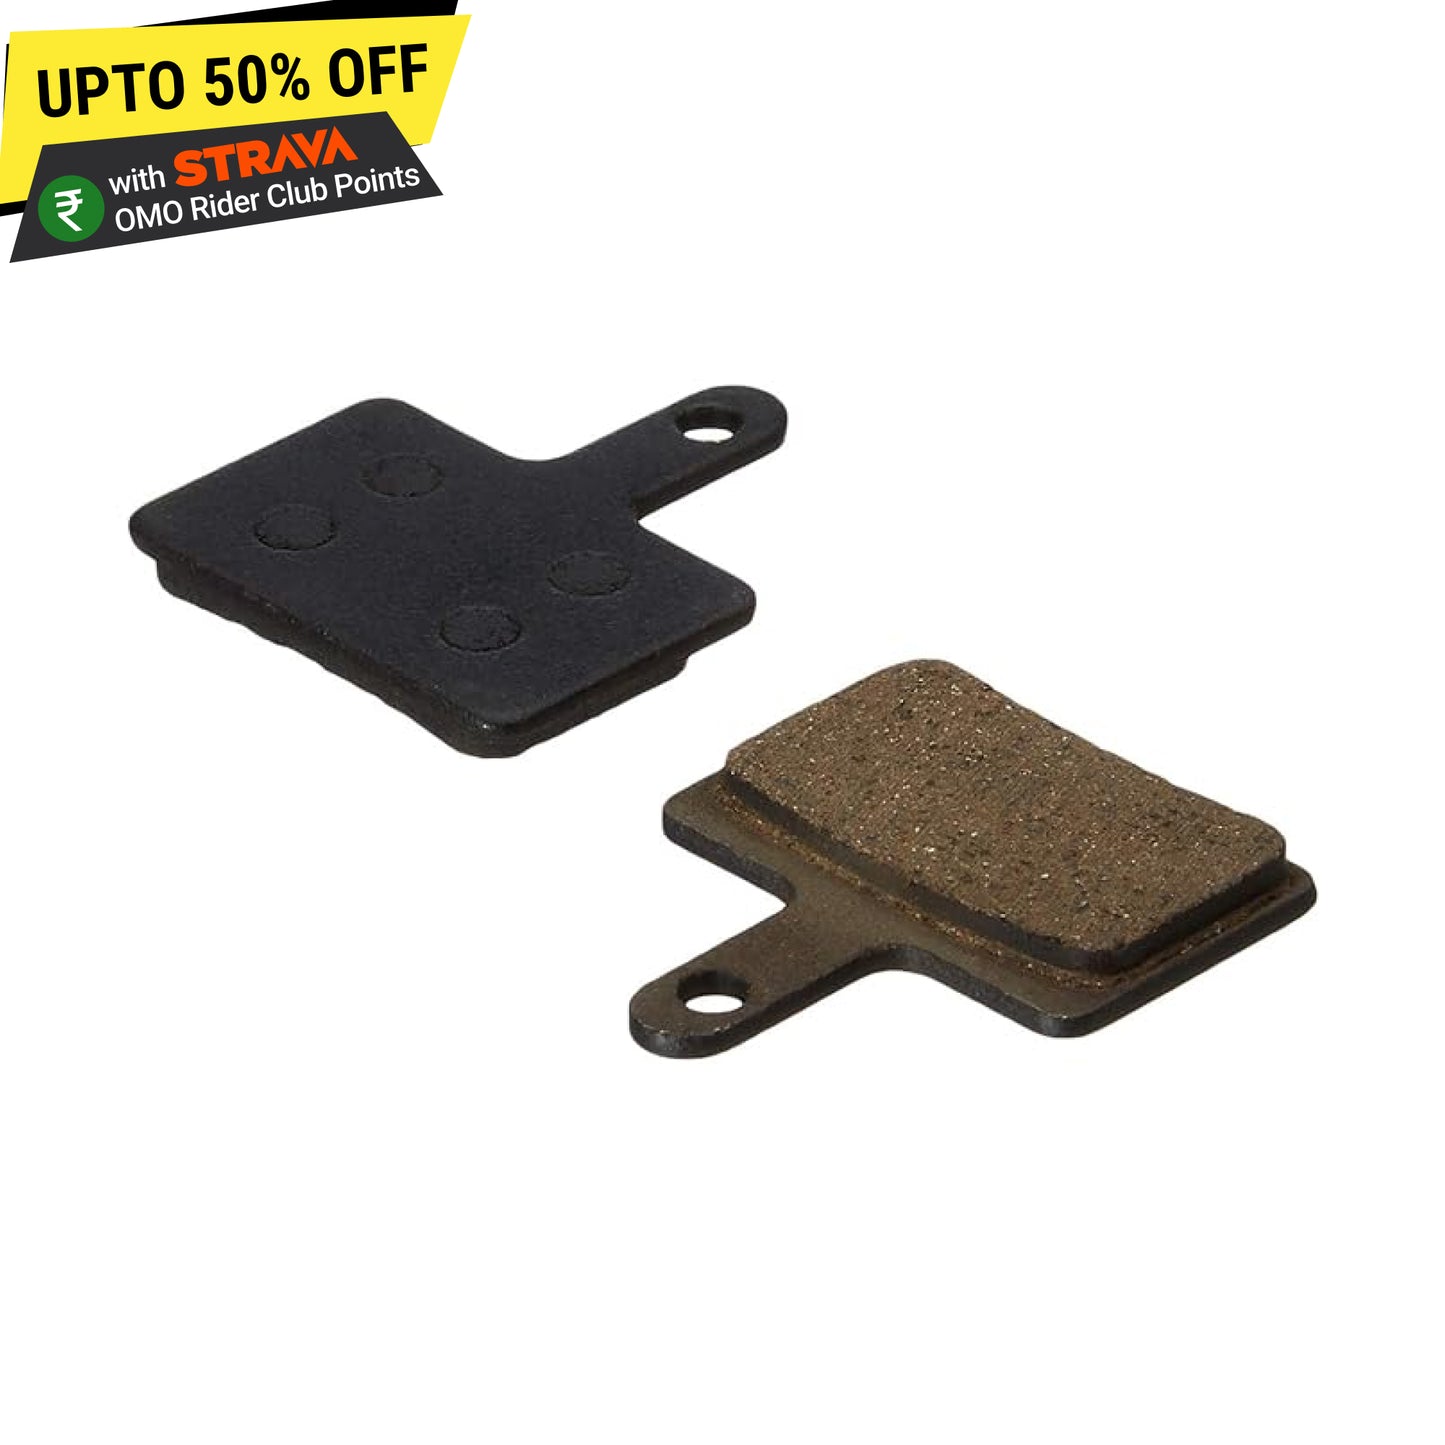 Bicycle disc brake pads spare parts top view by omobikes